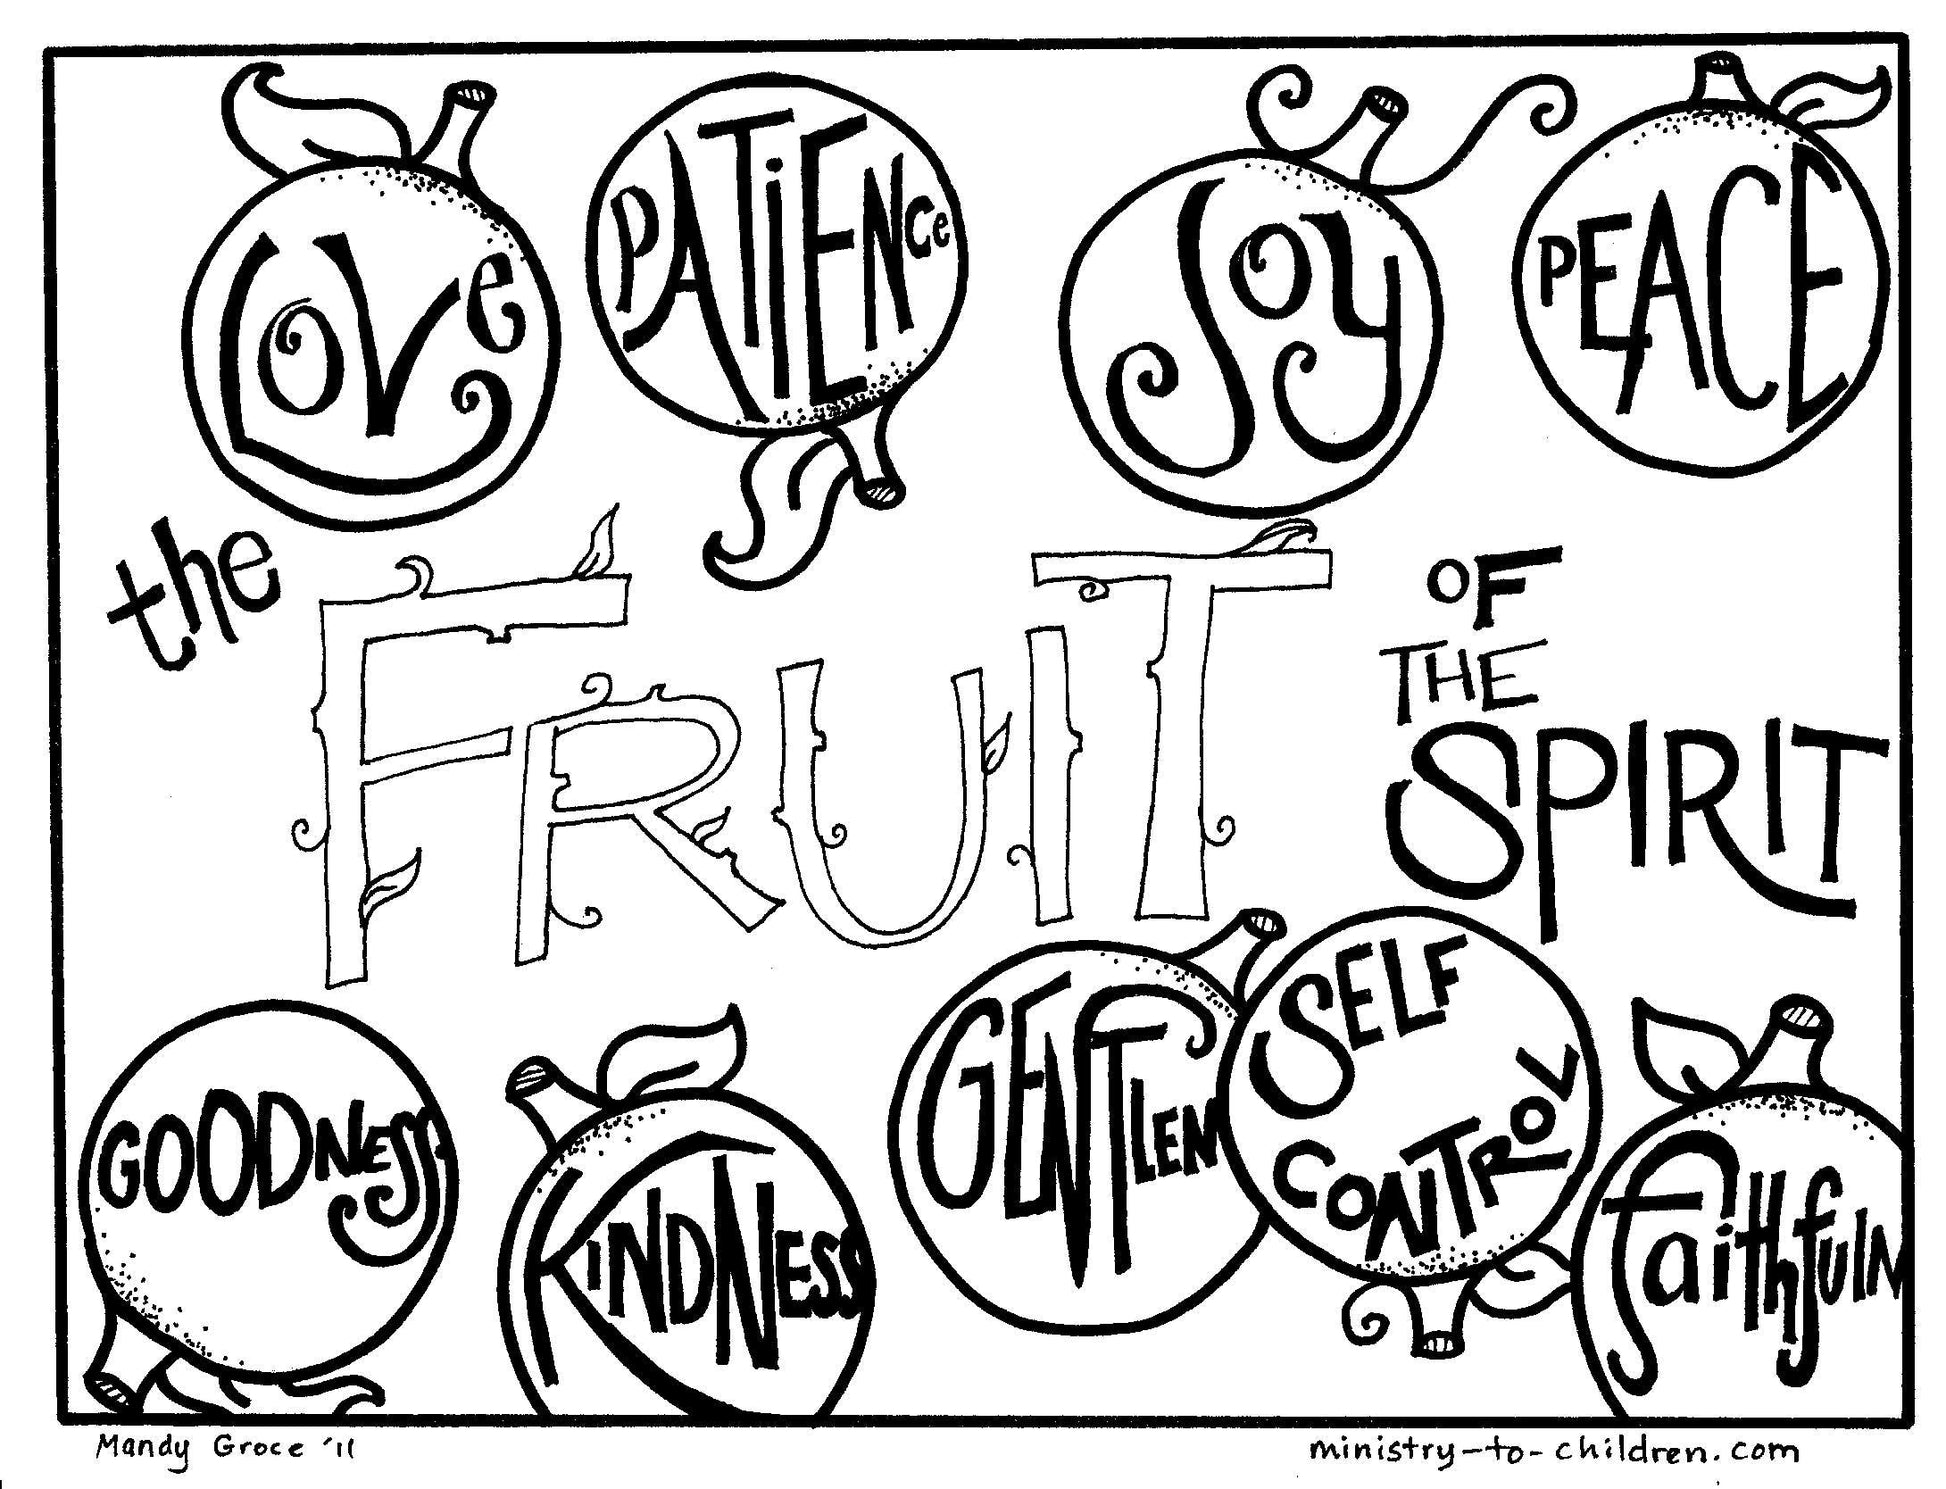 The Fruit of the Spirit Coloring 10-Page Download - Sunday School Store 